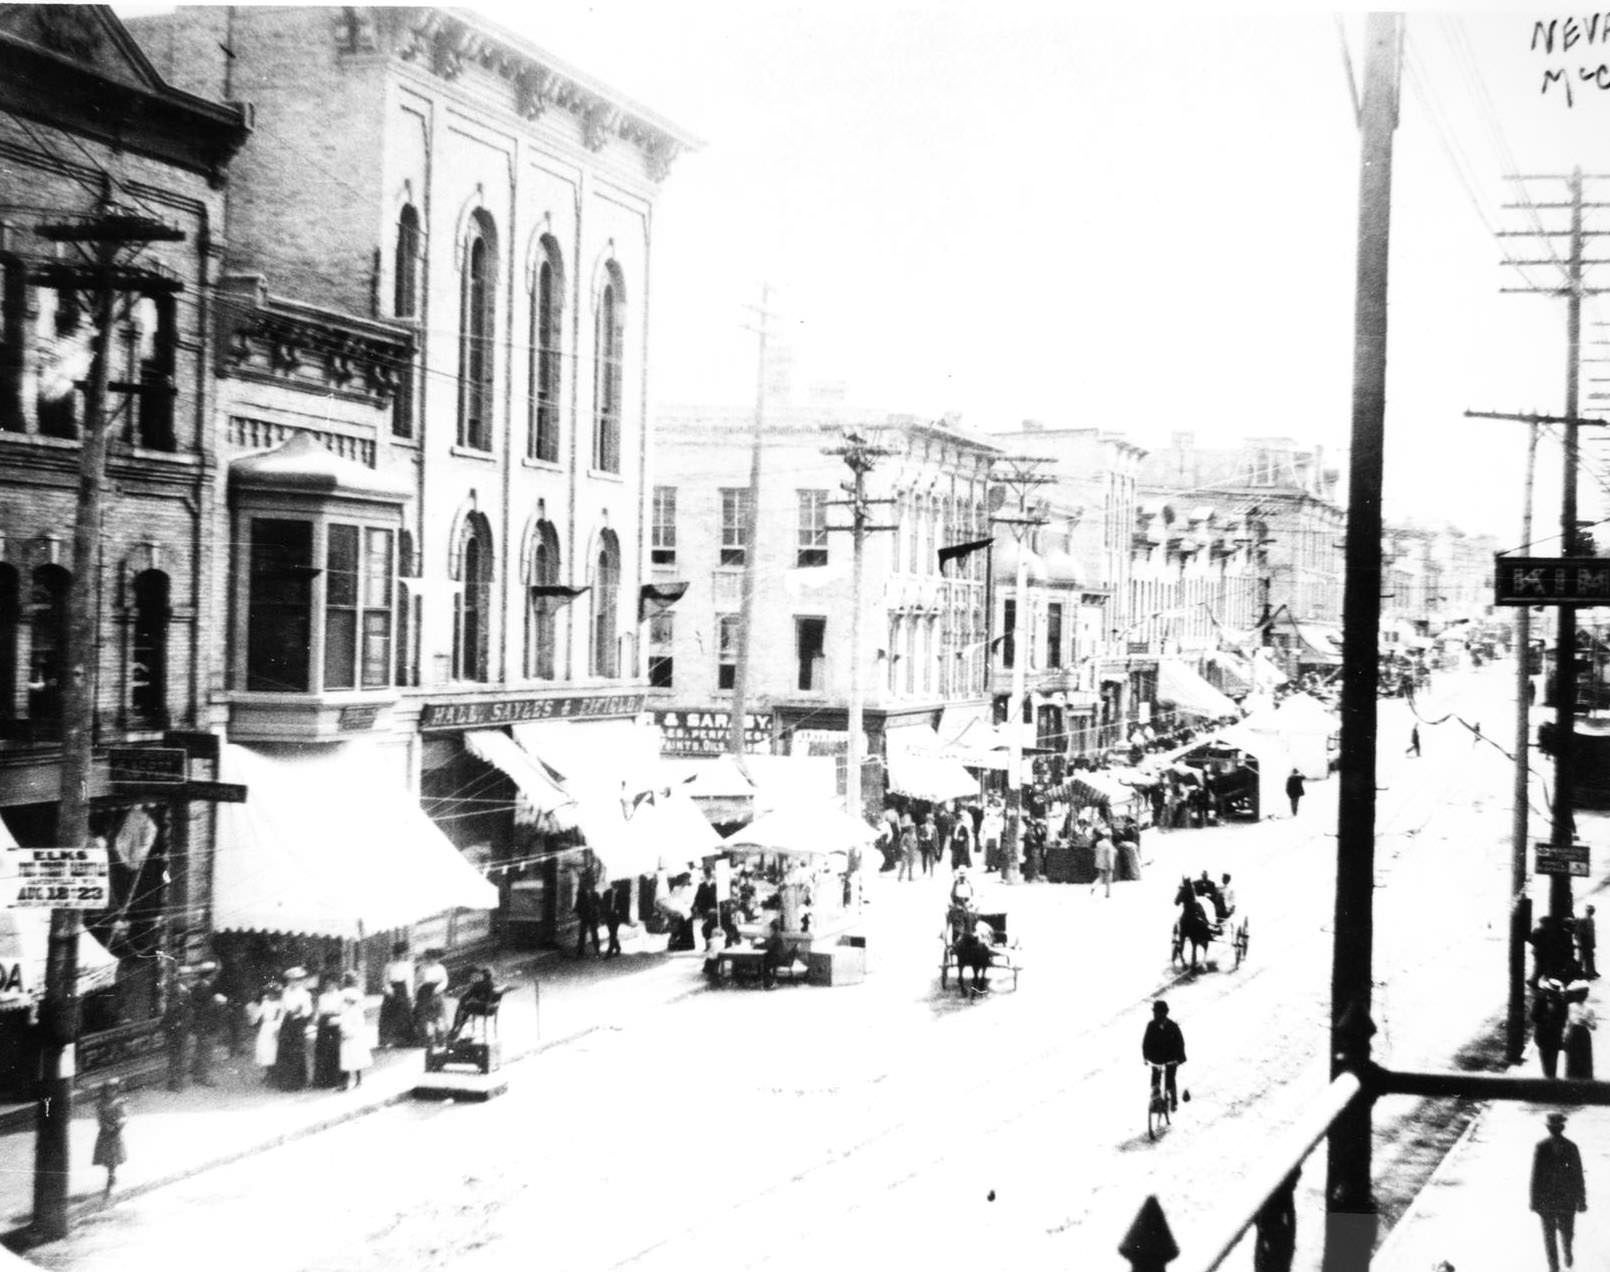 Elks Carnival Parade on Milwaukee Street in August, 1890